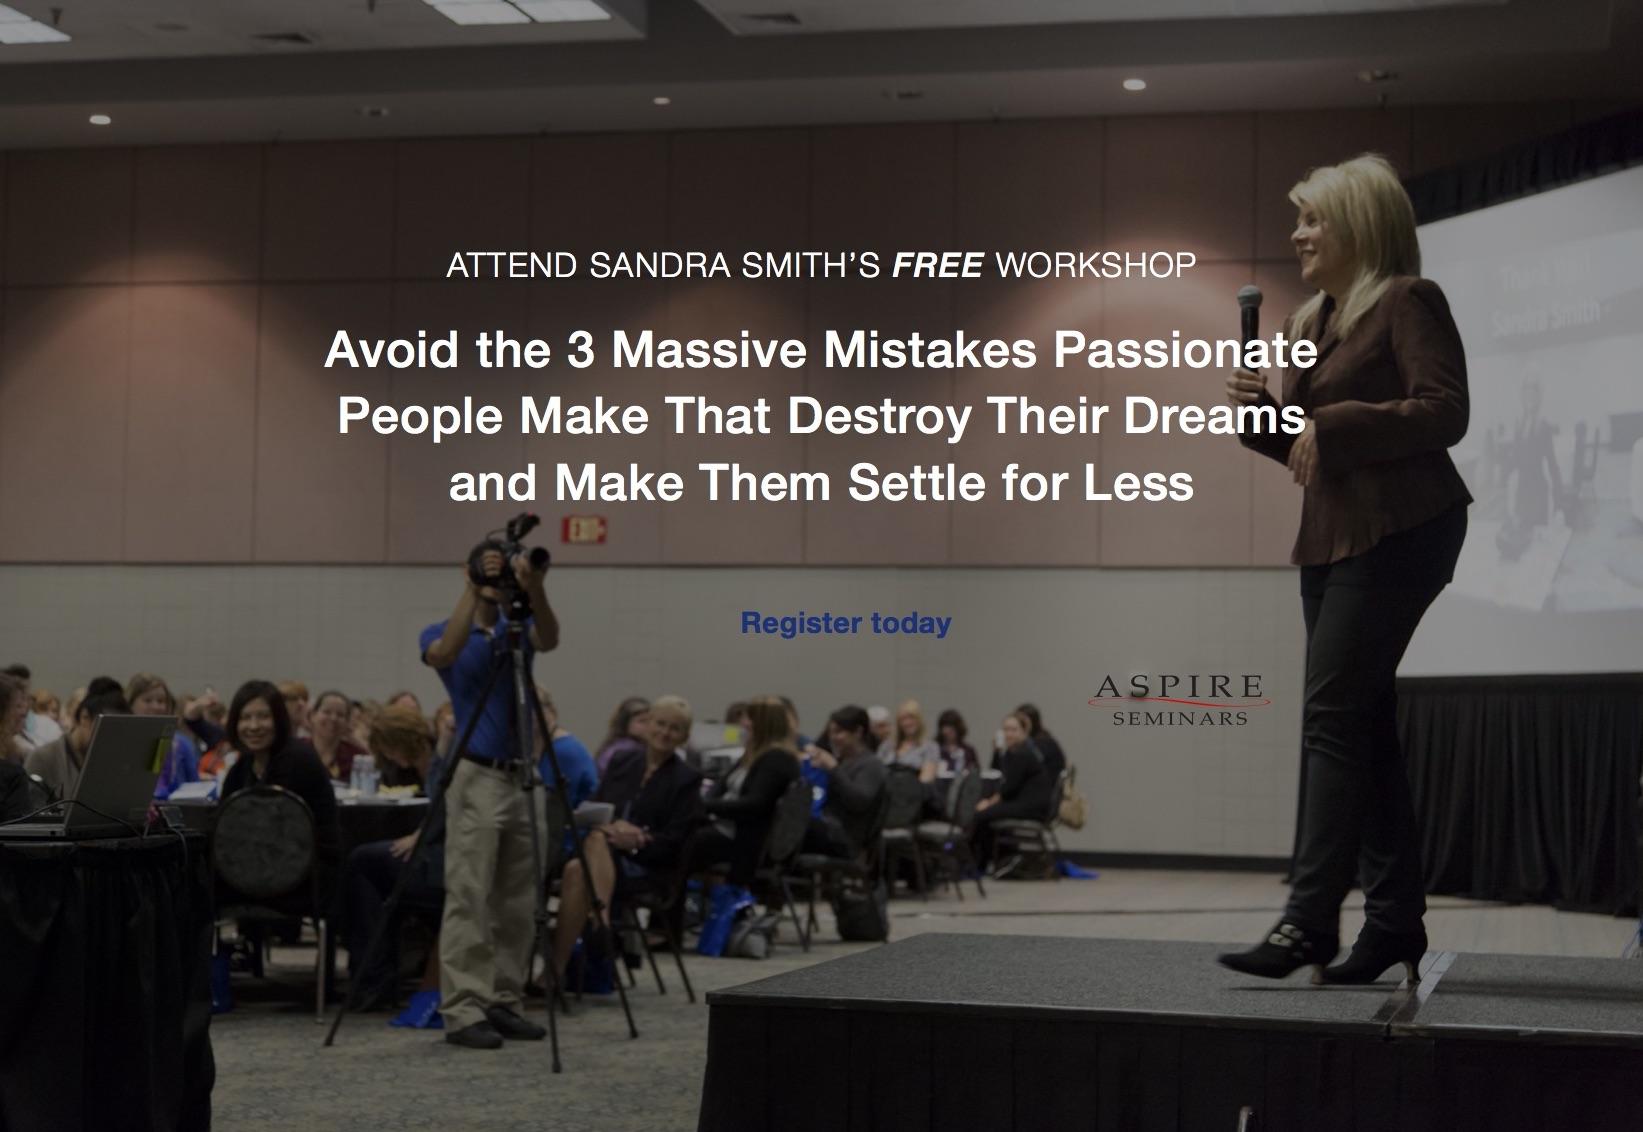 Avoid 3 Massive Mistakes Passionate People Make That Destroy Their Dreams and Make Them Settle for Less